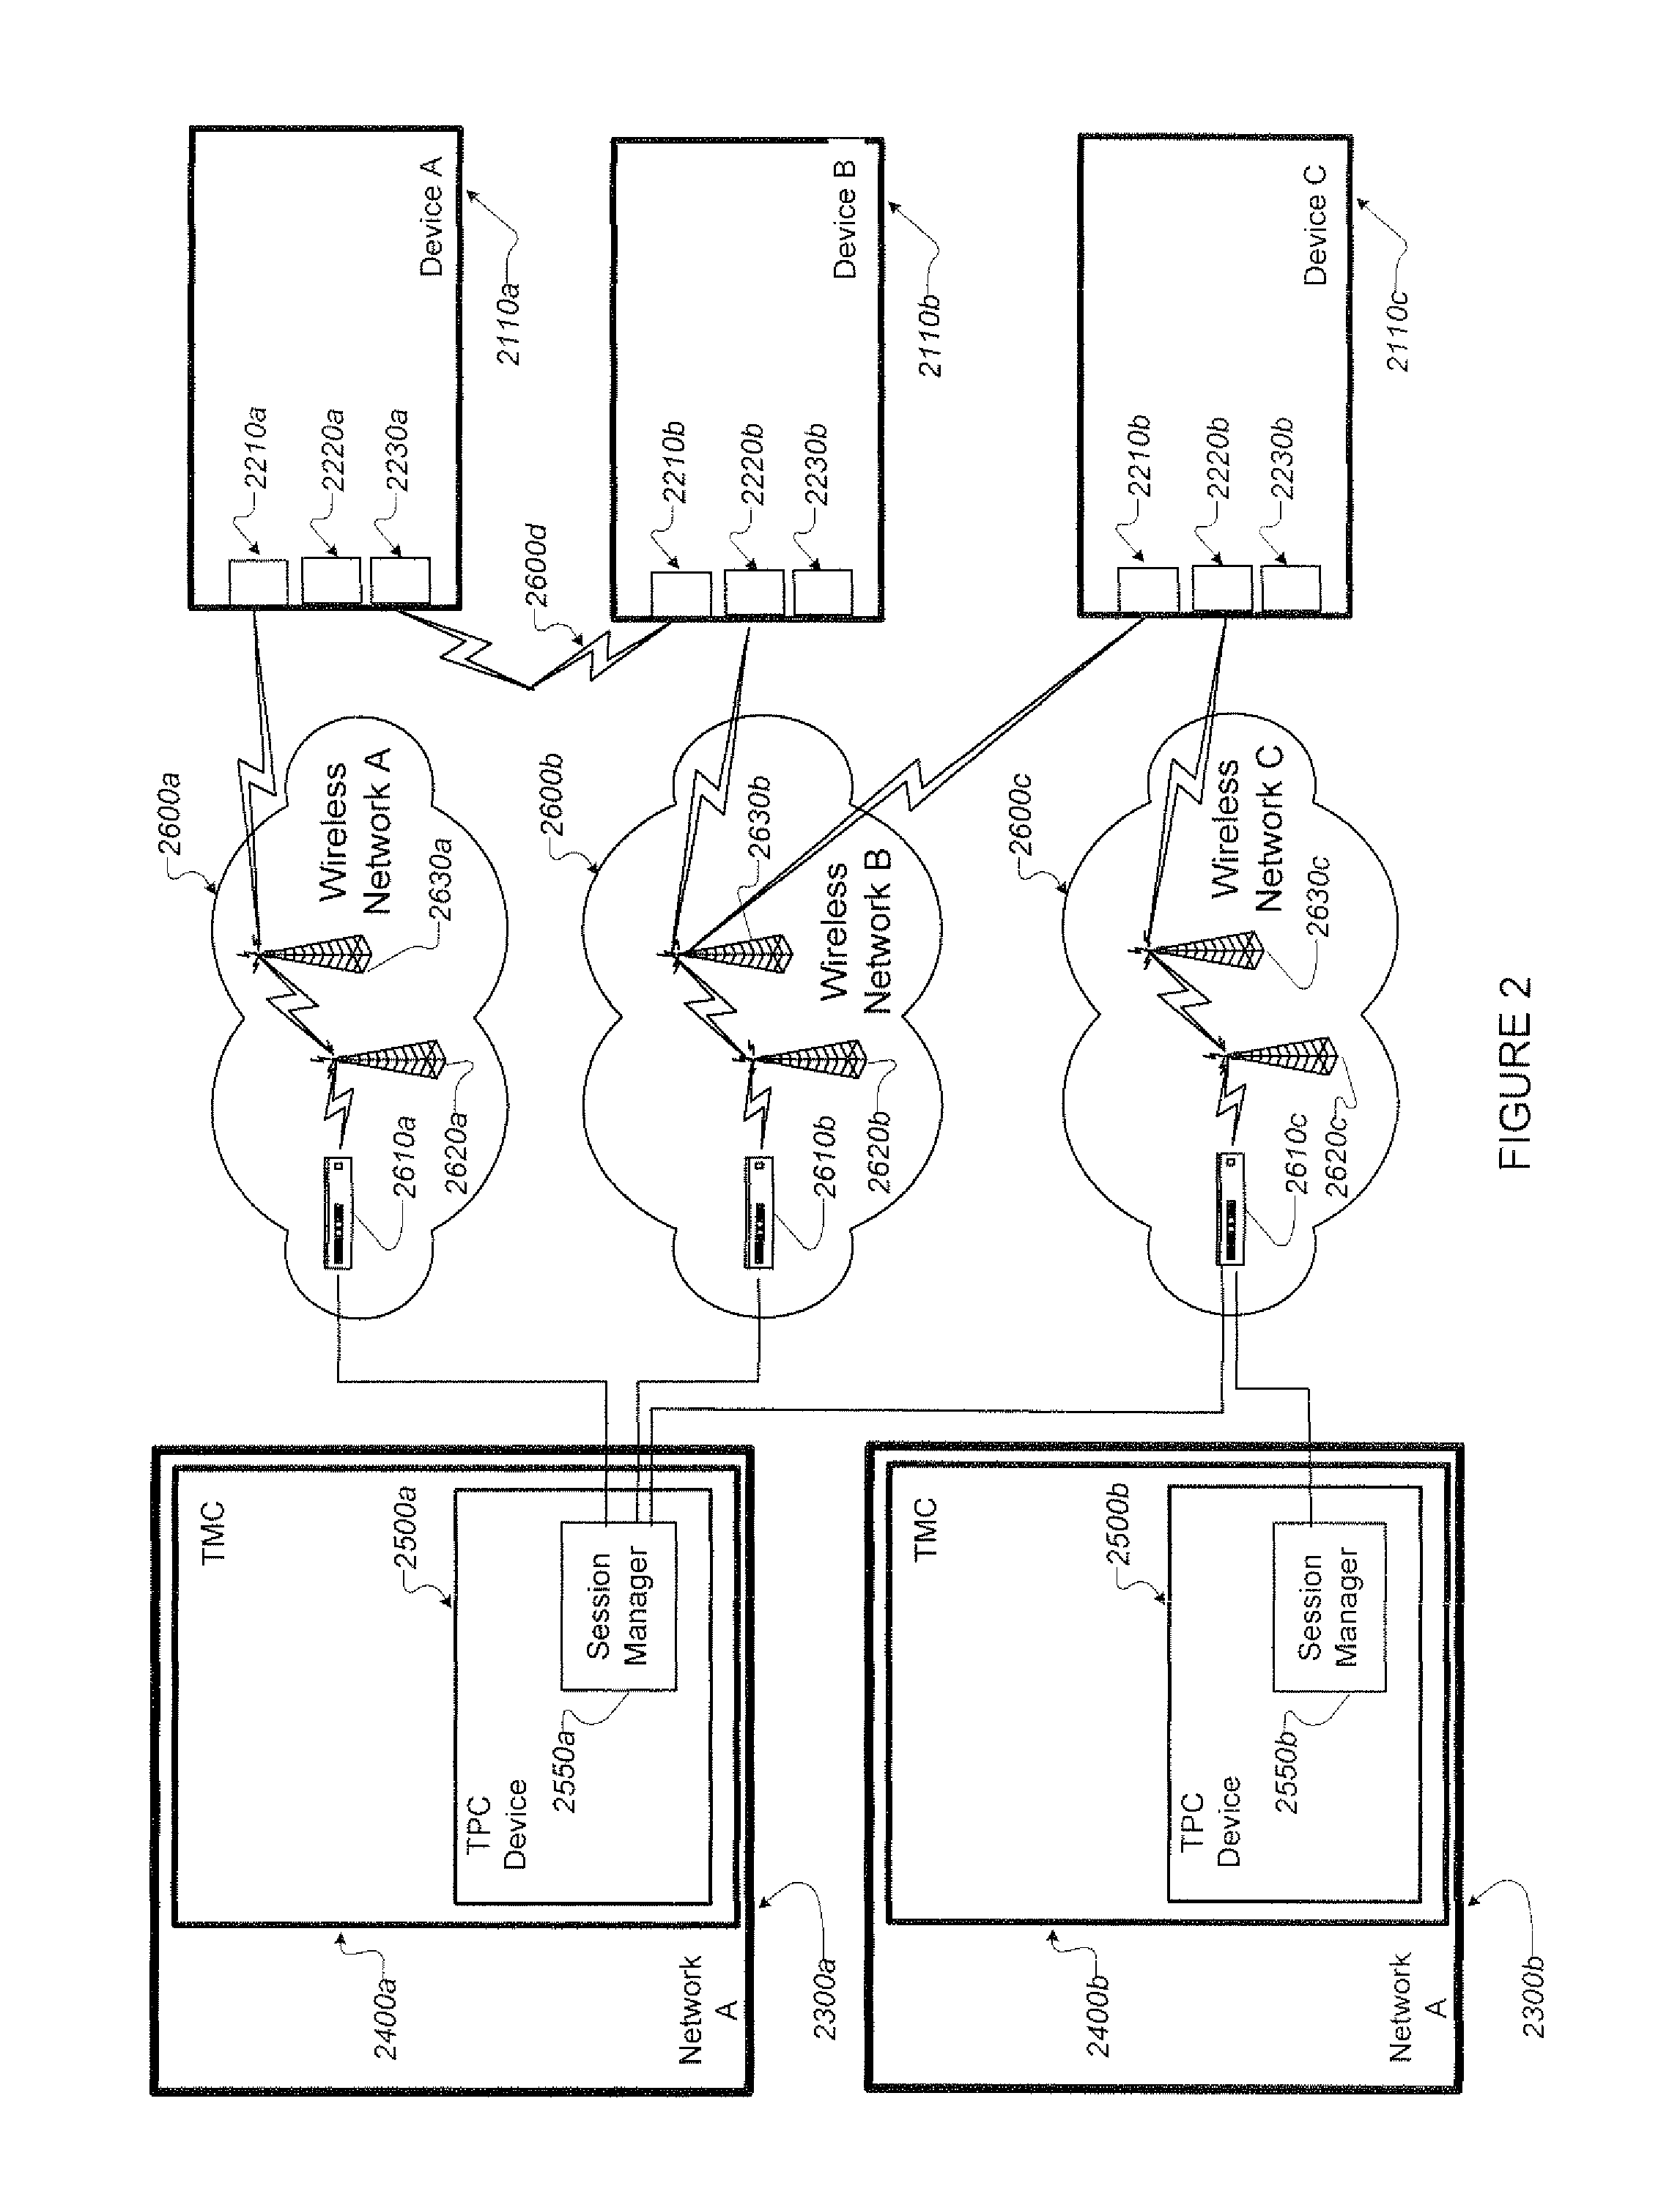 System and method for dynamic automatic communication path selection, distributed device synchronization and task delegation